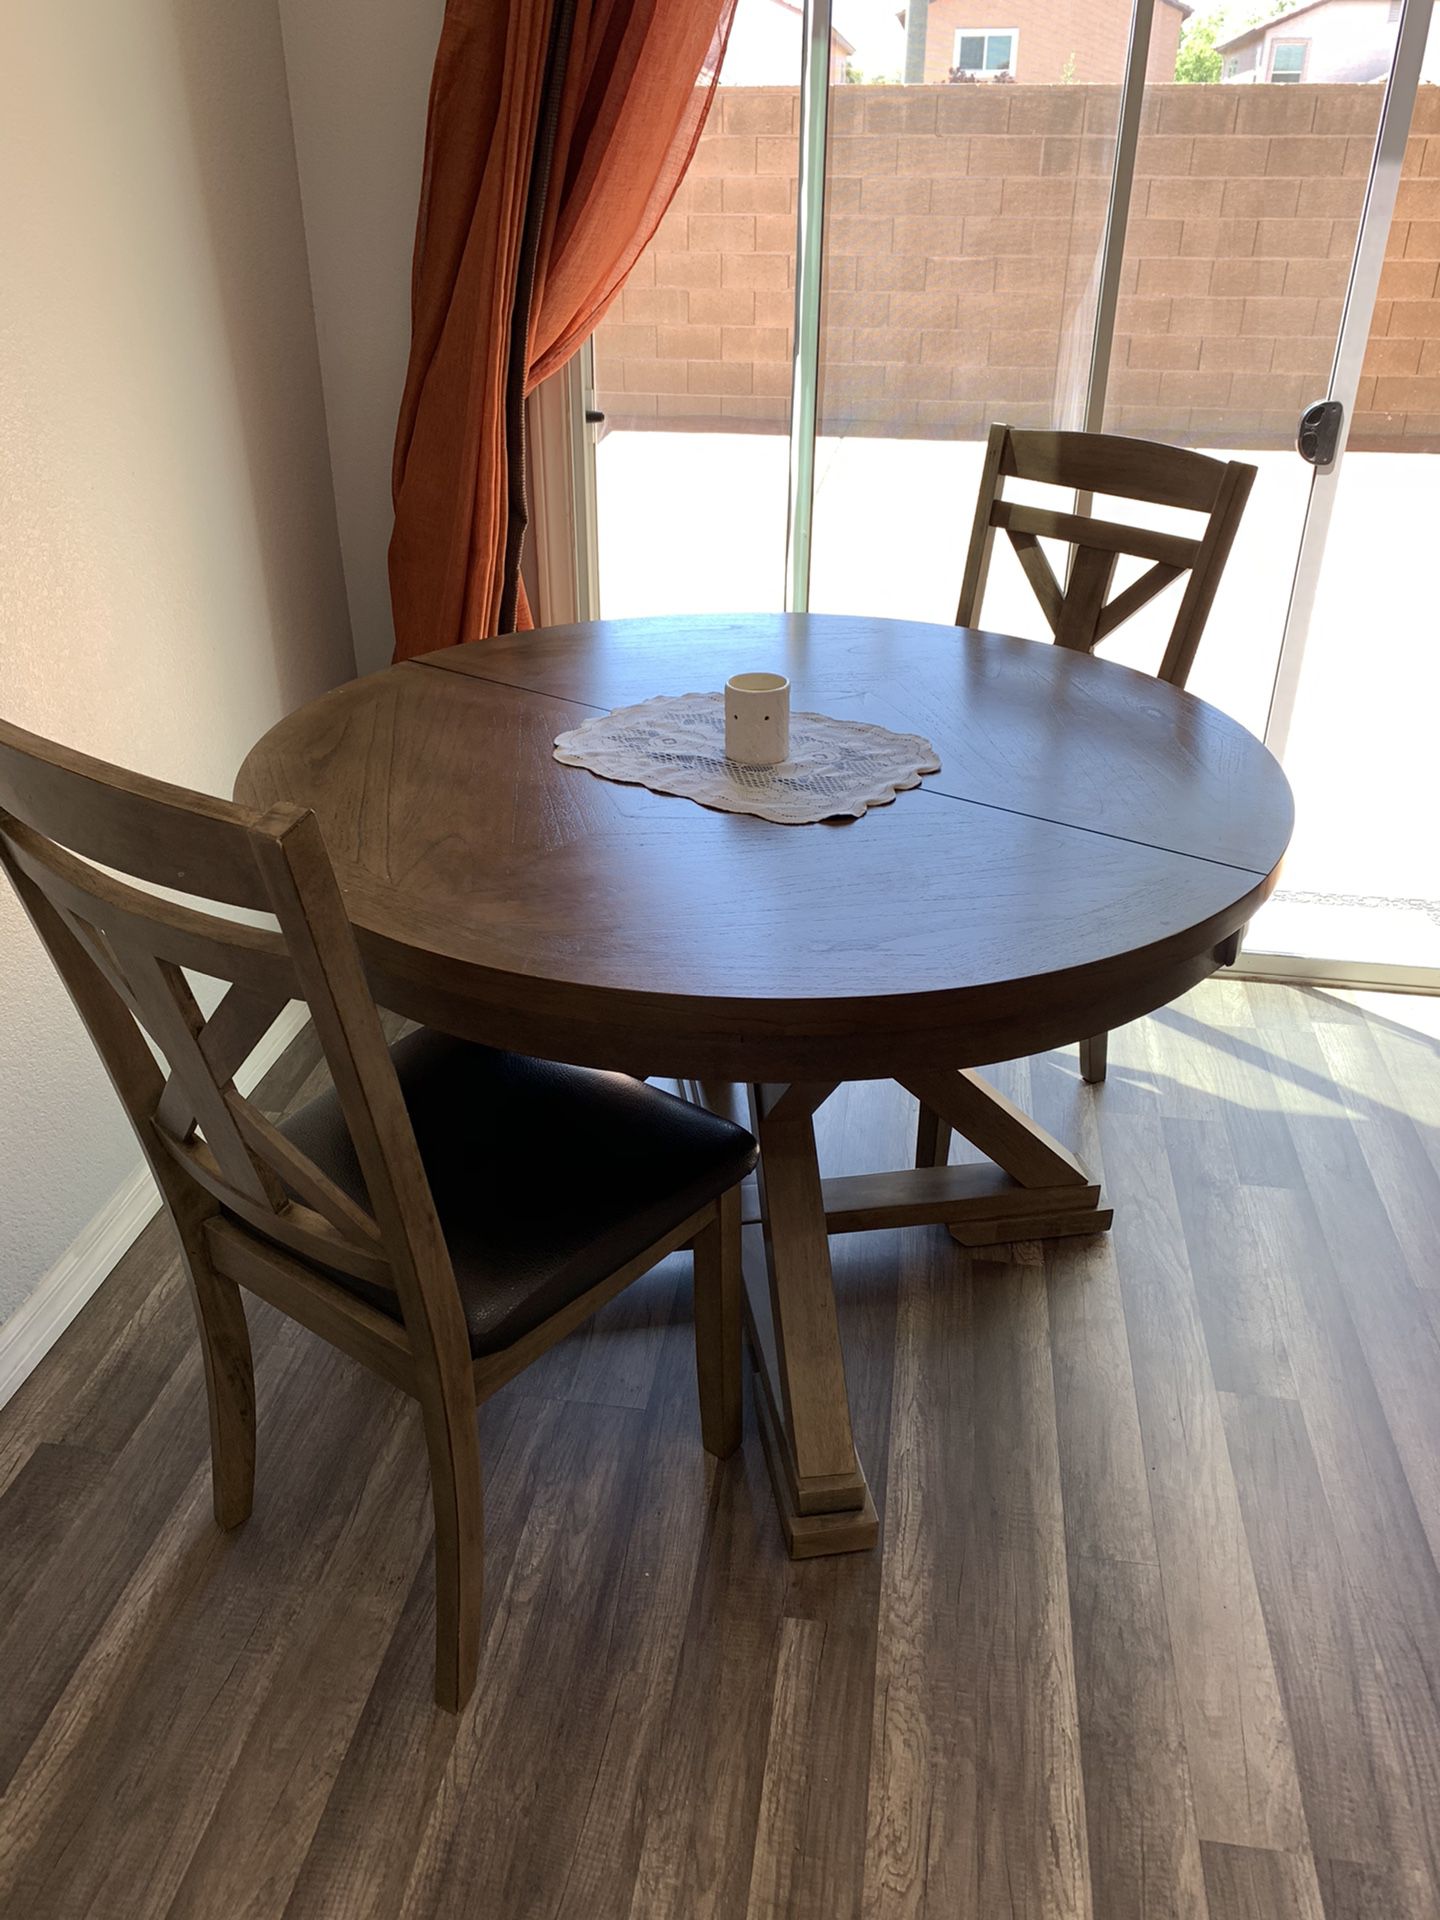 4’ round wooden dining table and 2 chairs